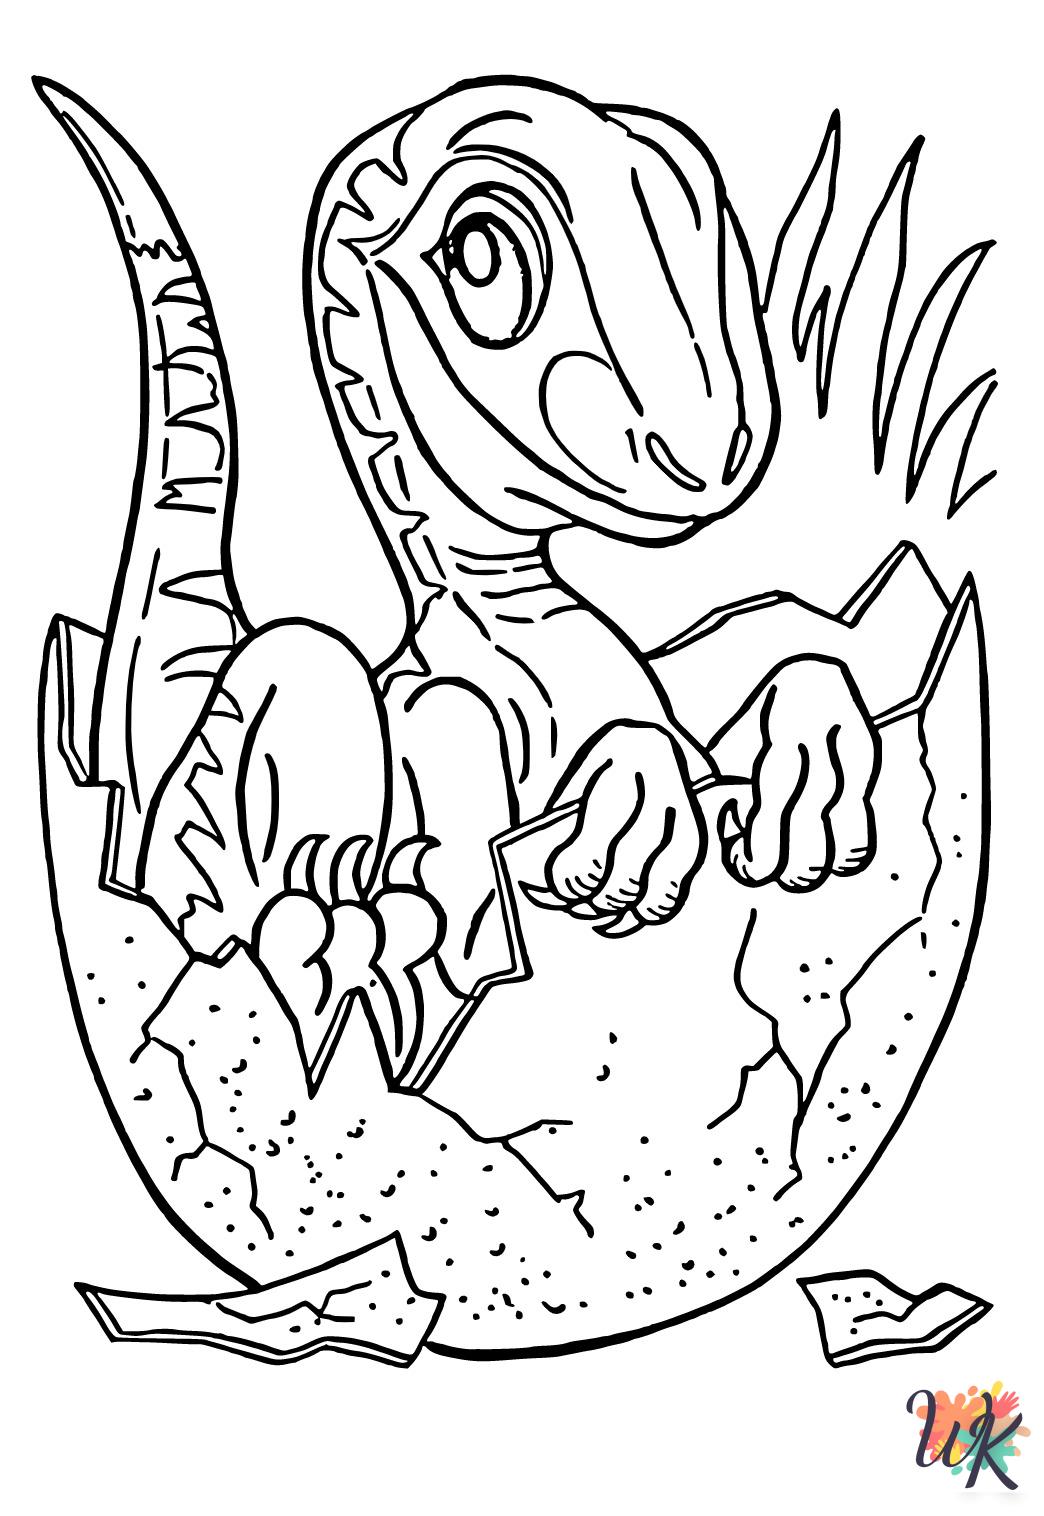 Jurassic Park printable coloring pages